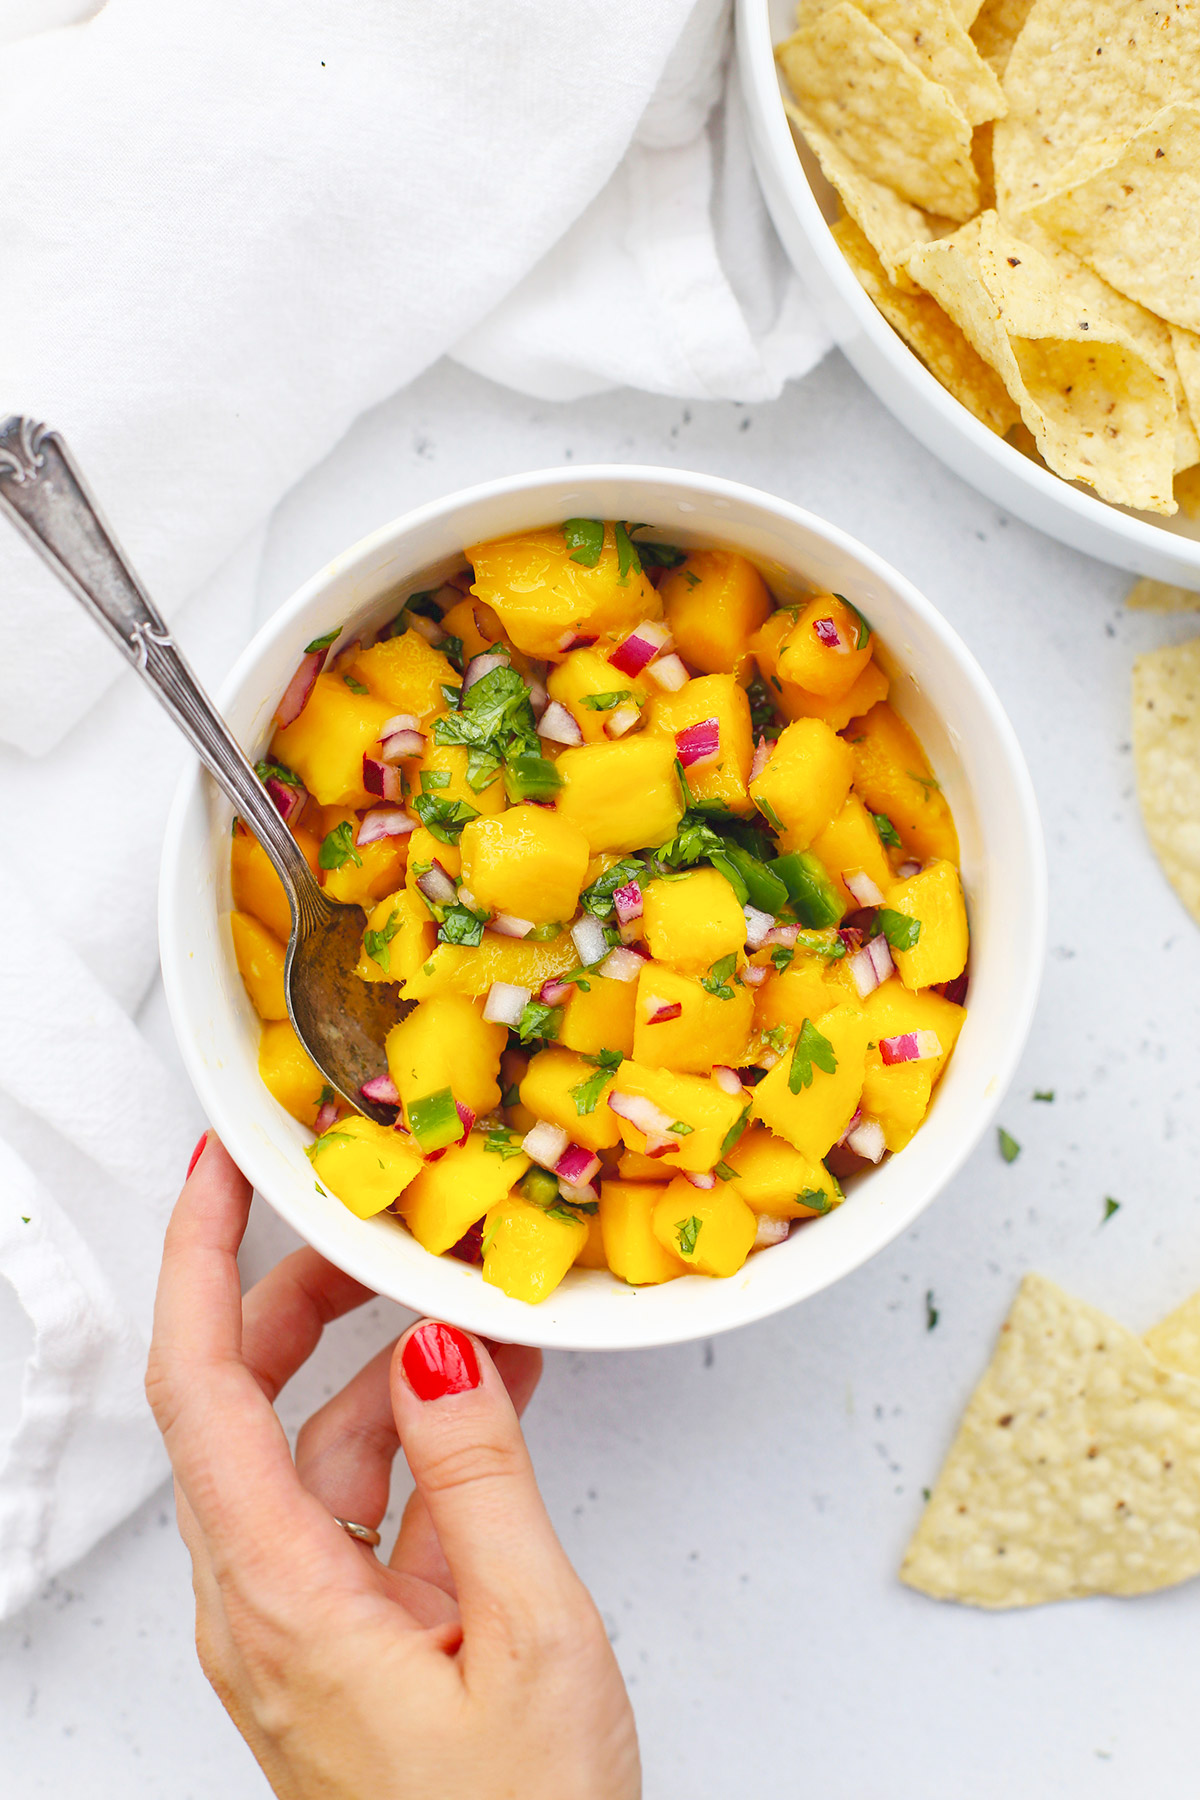 Placing a bowl of fresh mango salsa on a white background with chips